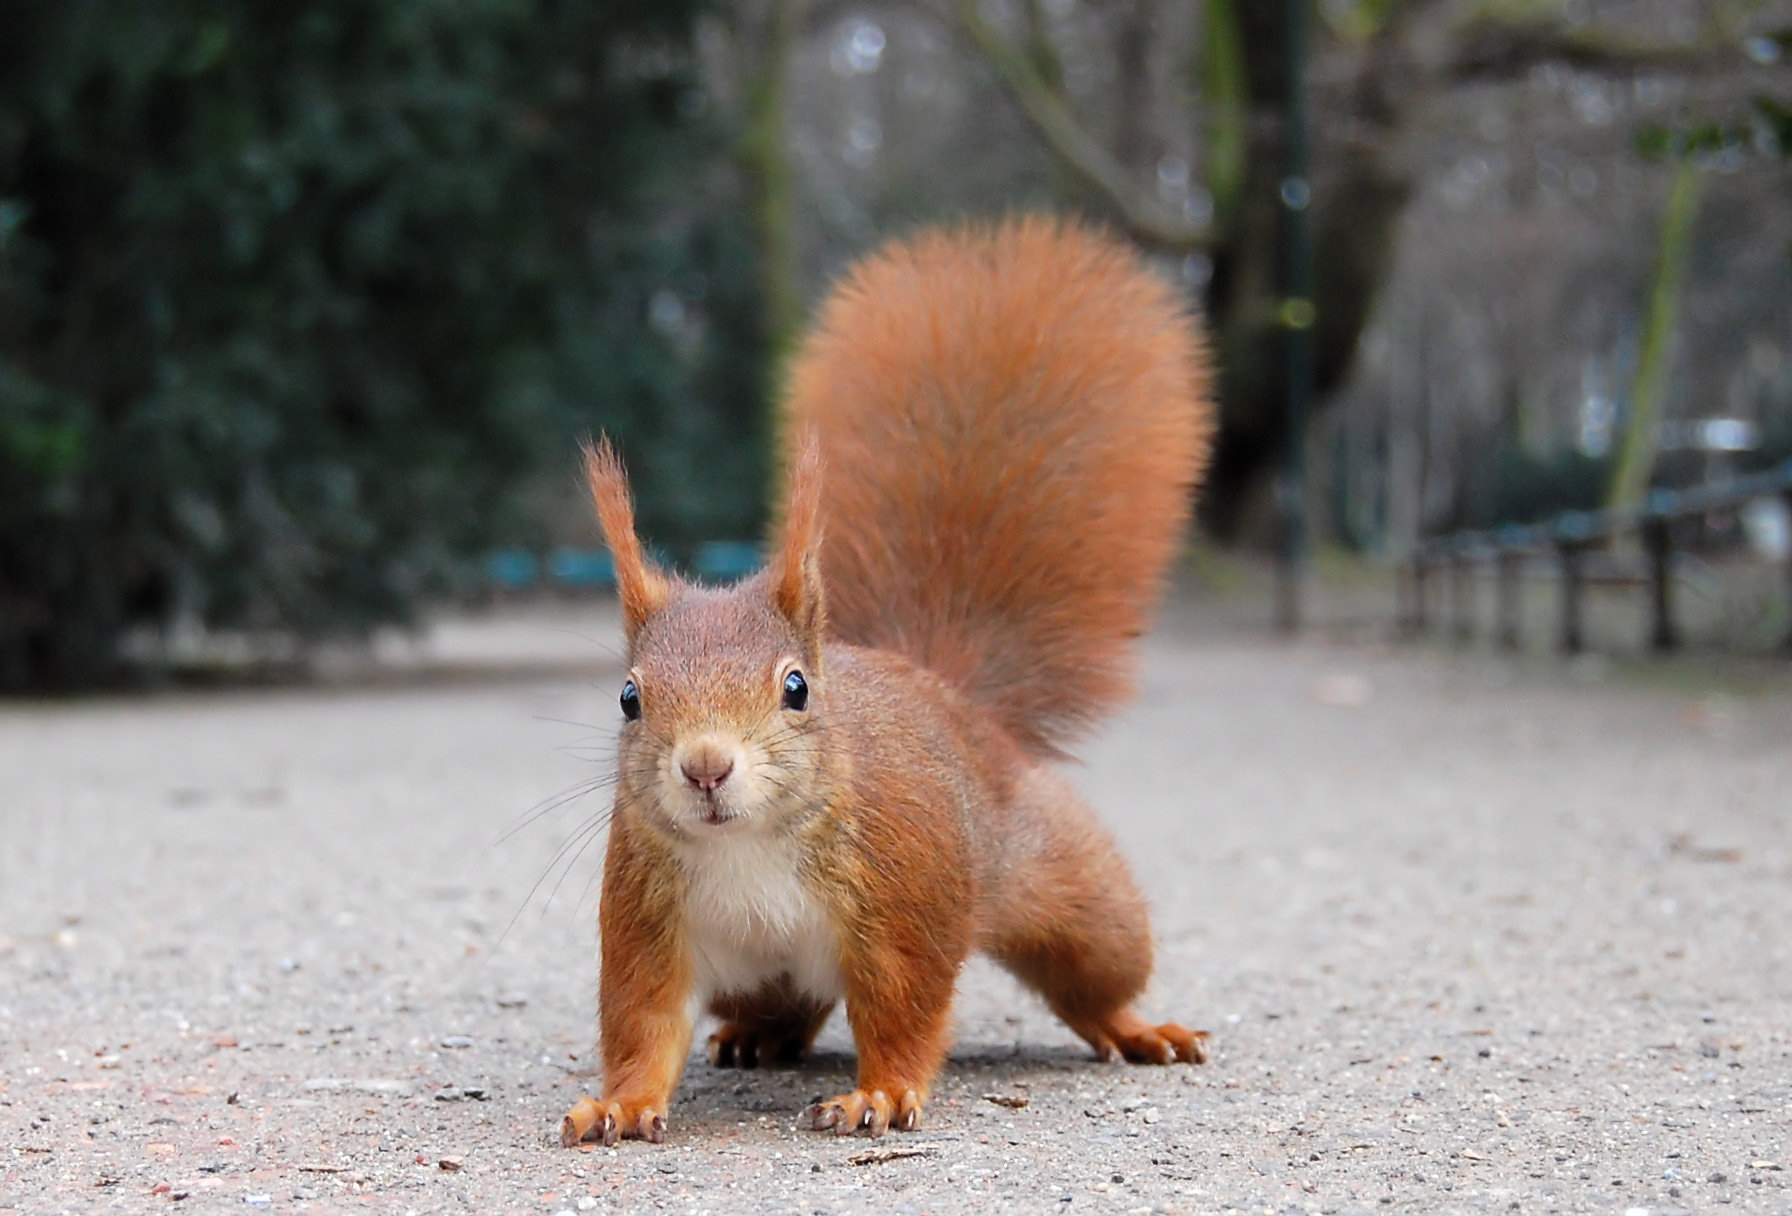 Photo of a squirrel in the park